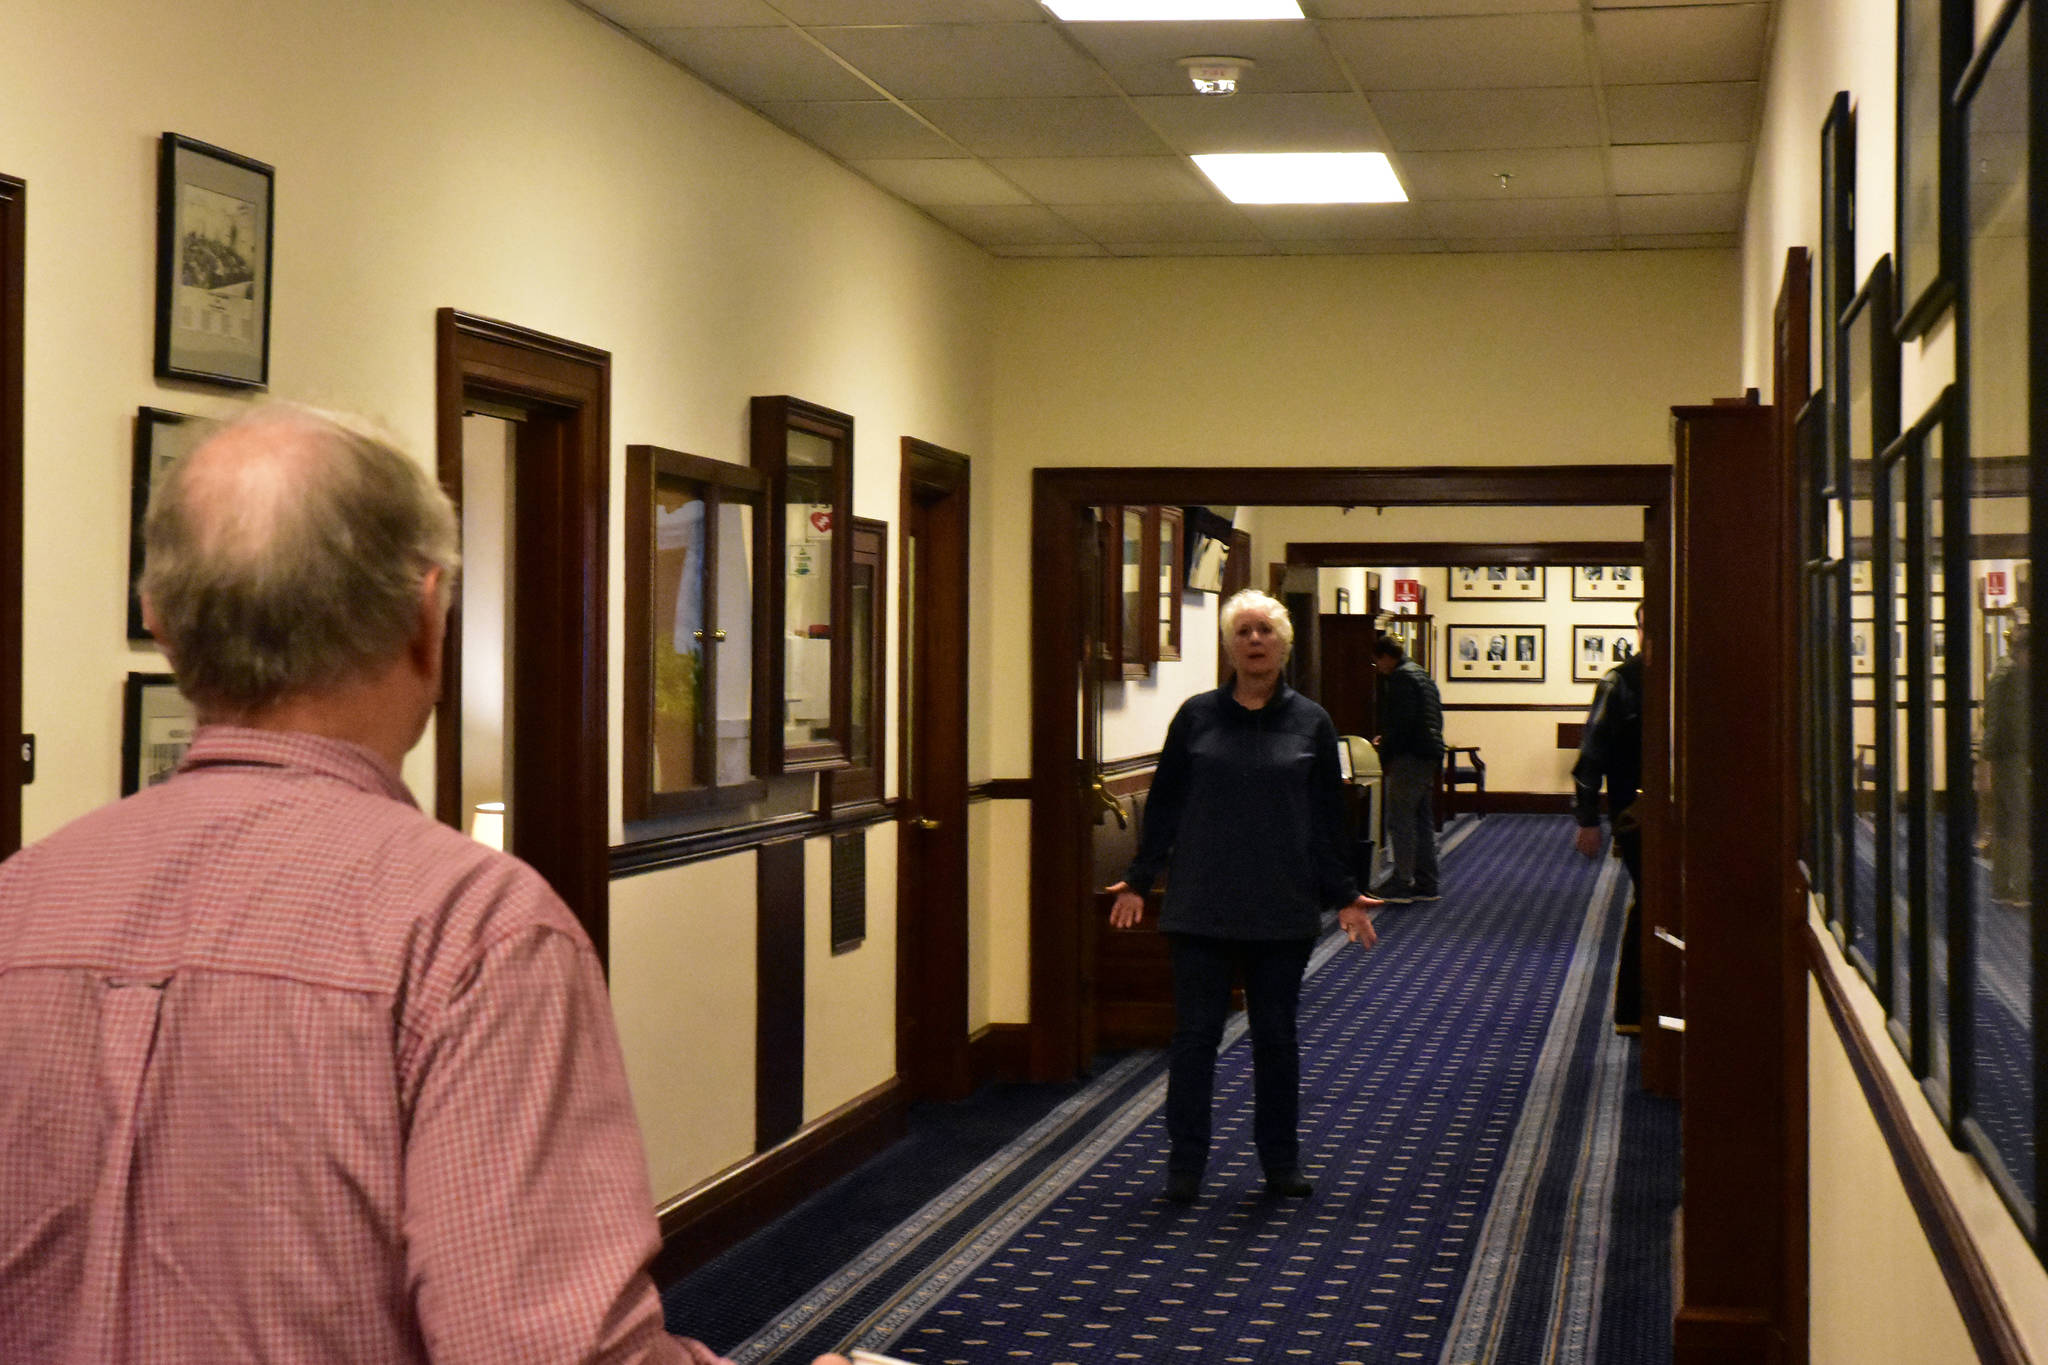 Rep. Louise Stutes, R-Kodiak, chats in the hallway of the Alaska State Capitol on Monday. (Peter Segall | Juneau Empire)